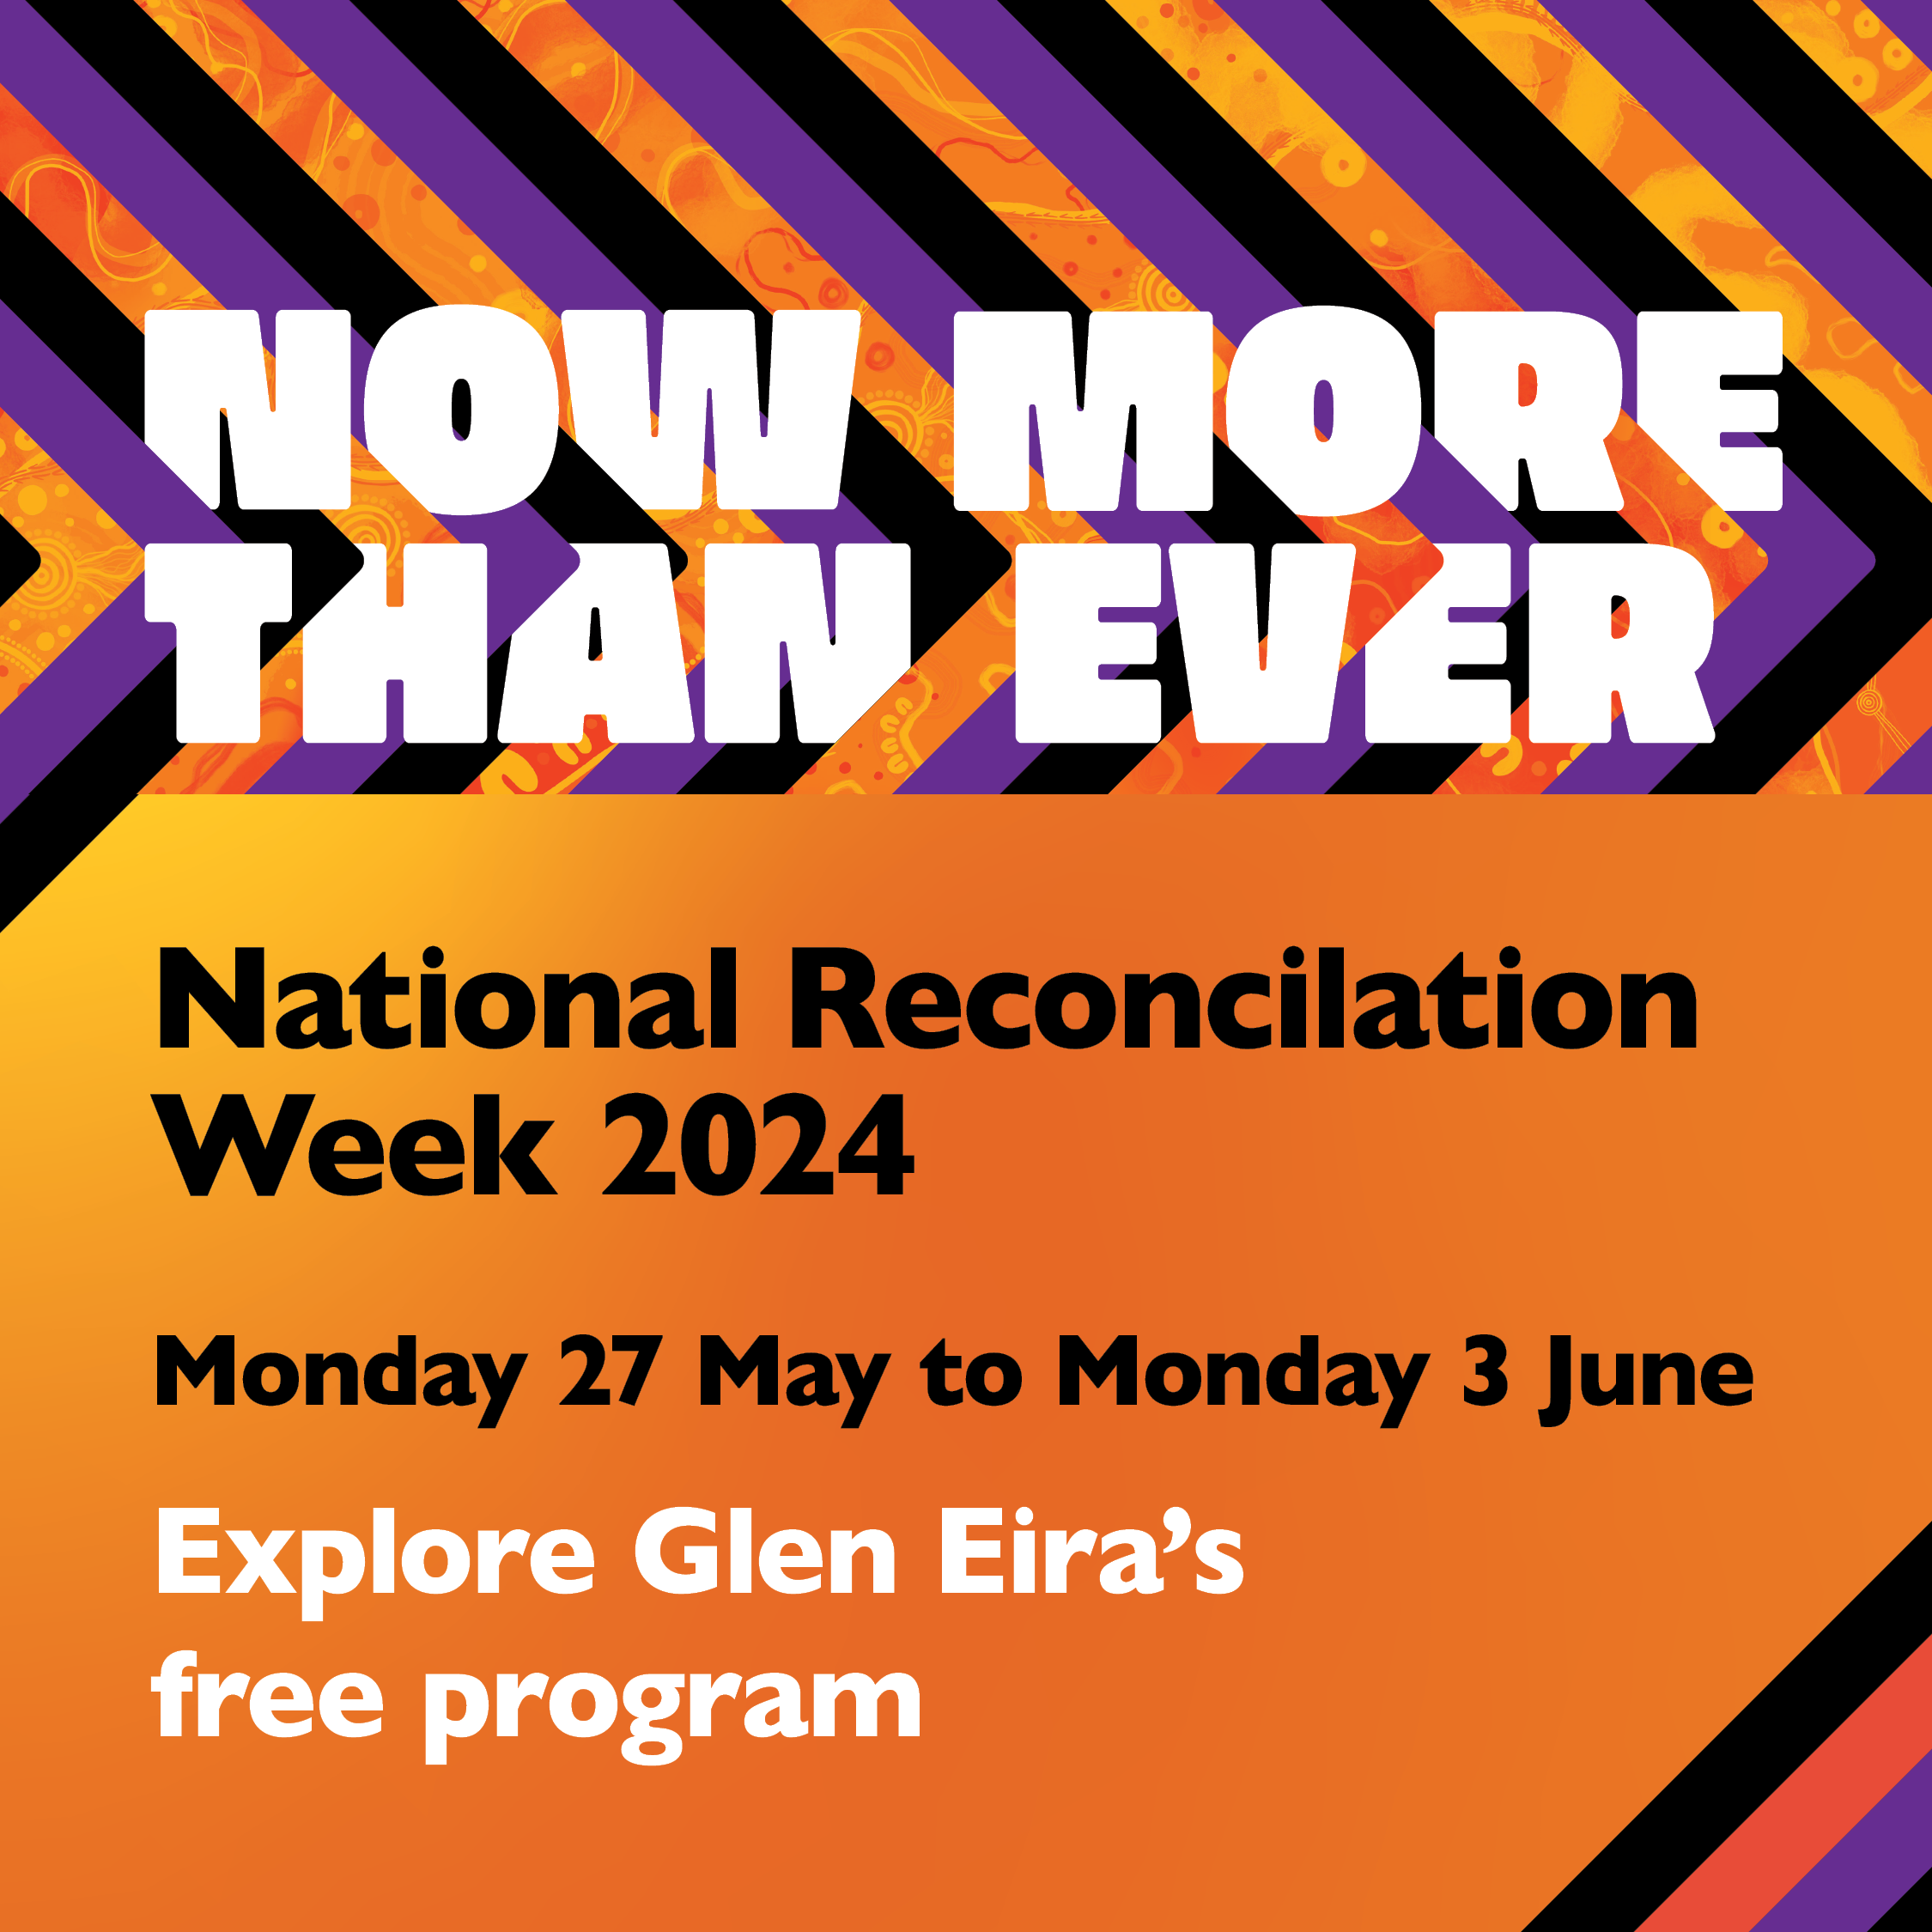 Now more than ever - National Reconciliation Week 2024 - Monday 27 May to Monday 3 June - Explore Glen Eira's free program